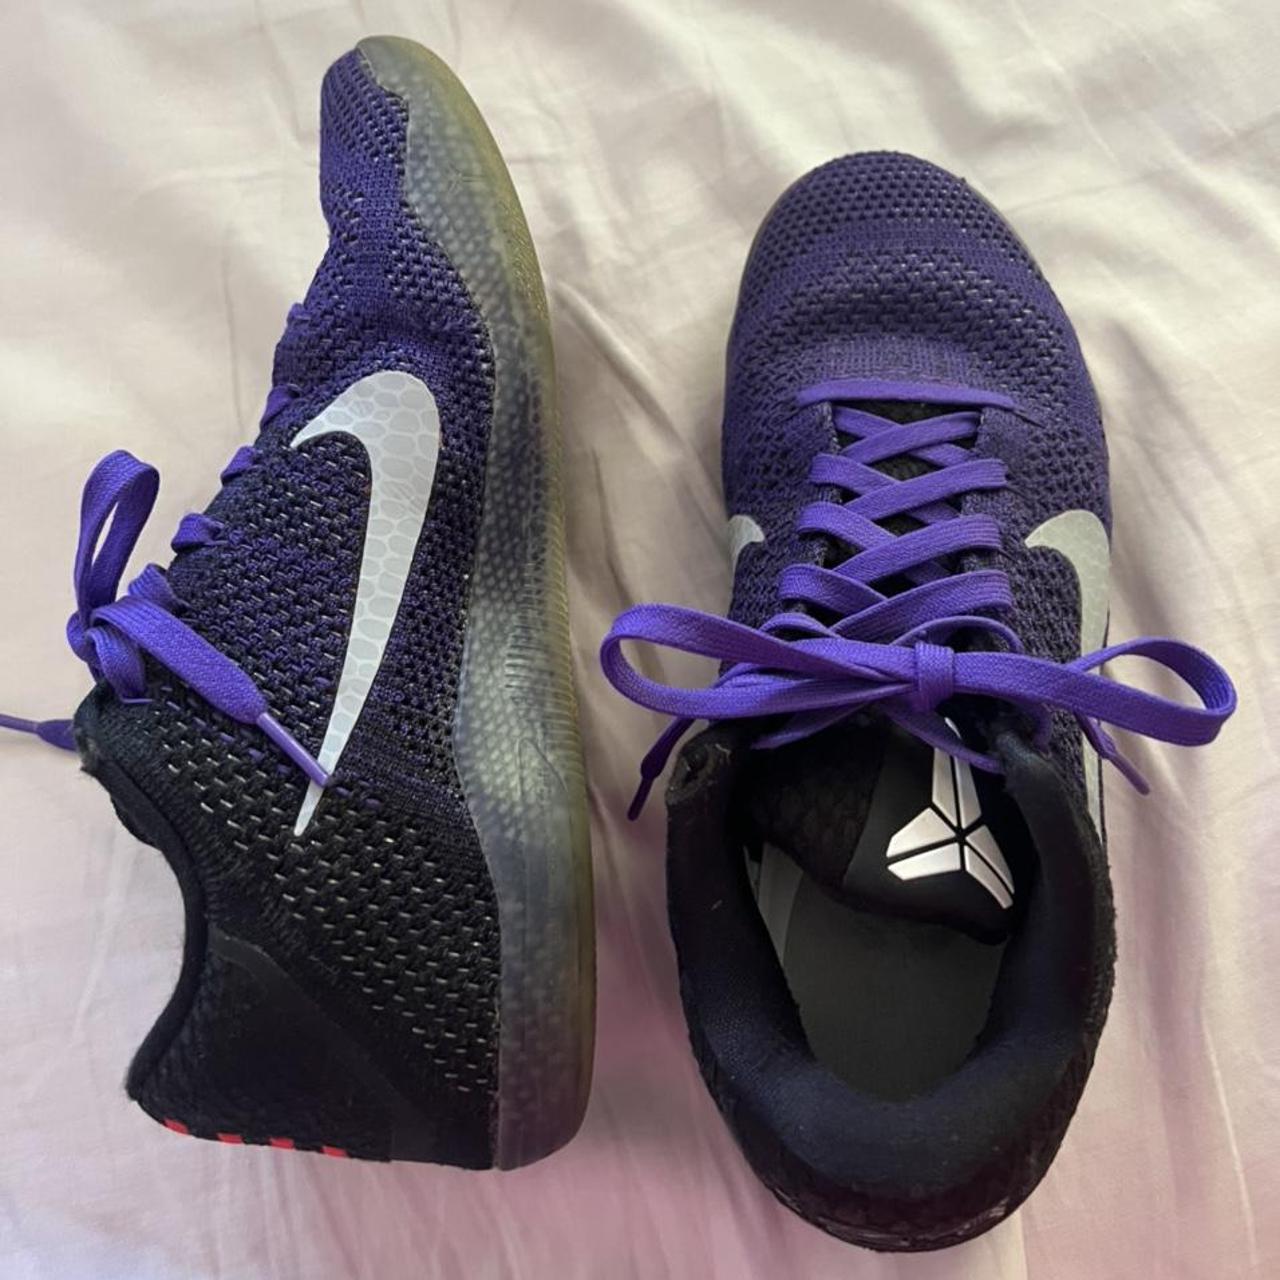 NIKE KOBE 11 ELITE LOW “USA” They are in insanely - Depop